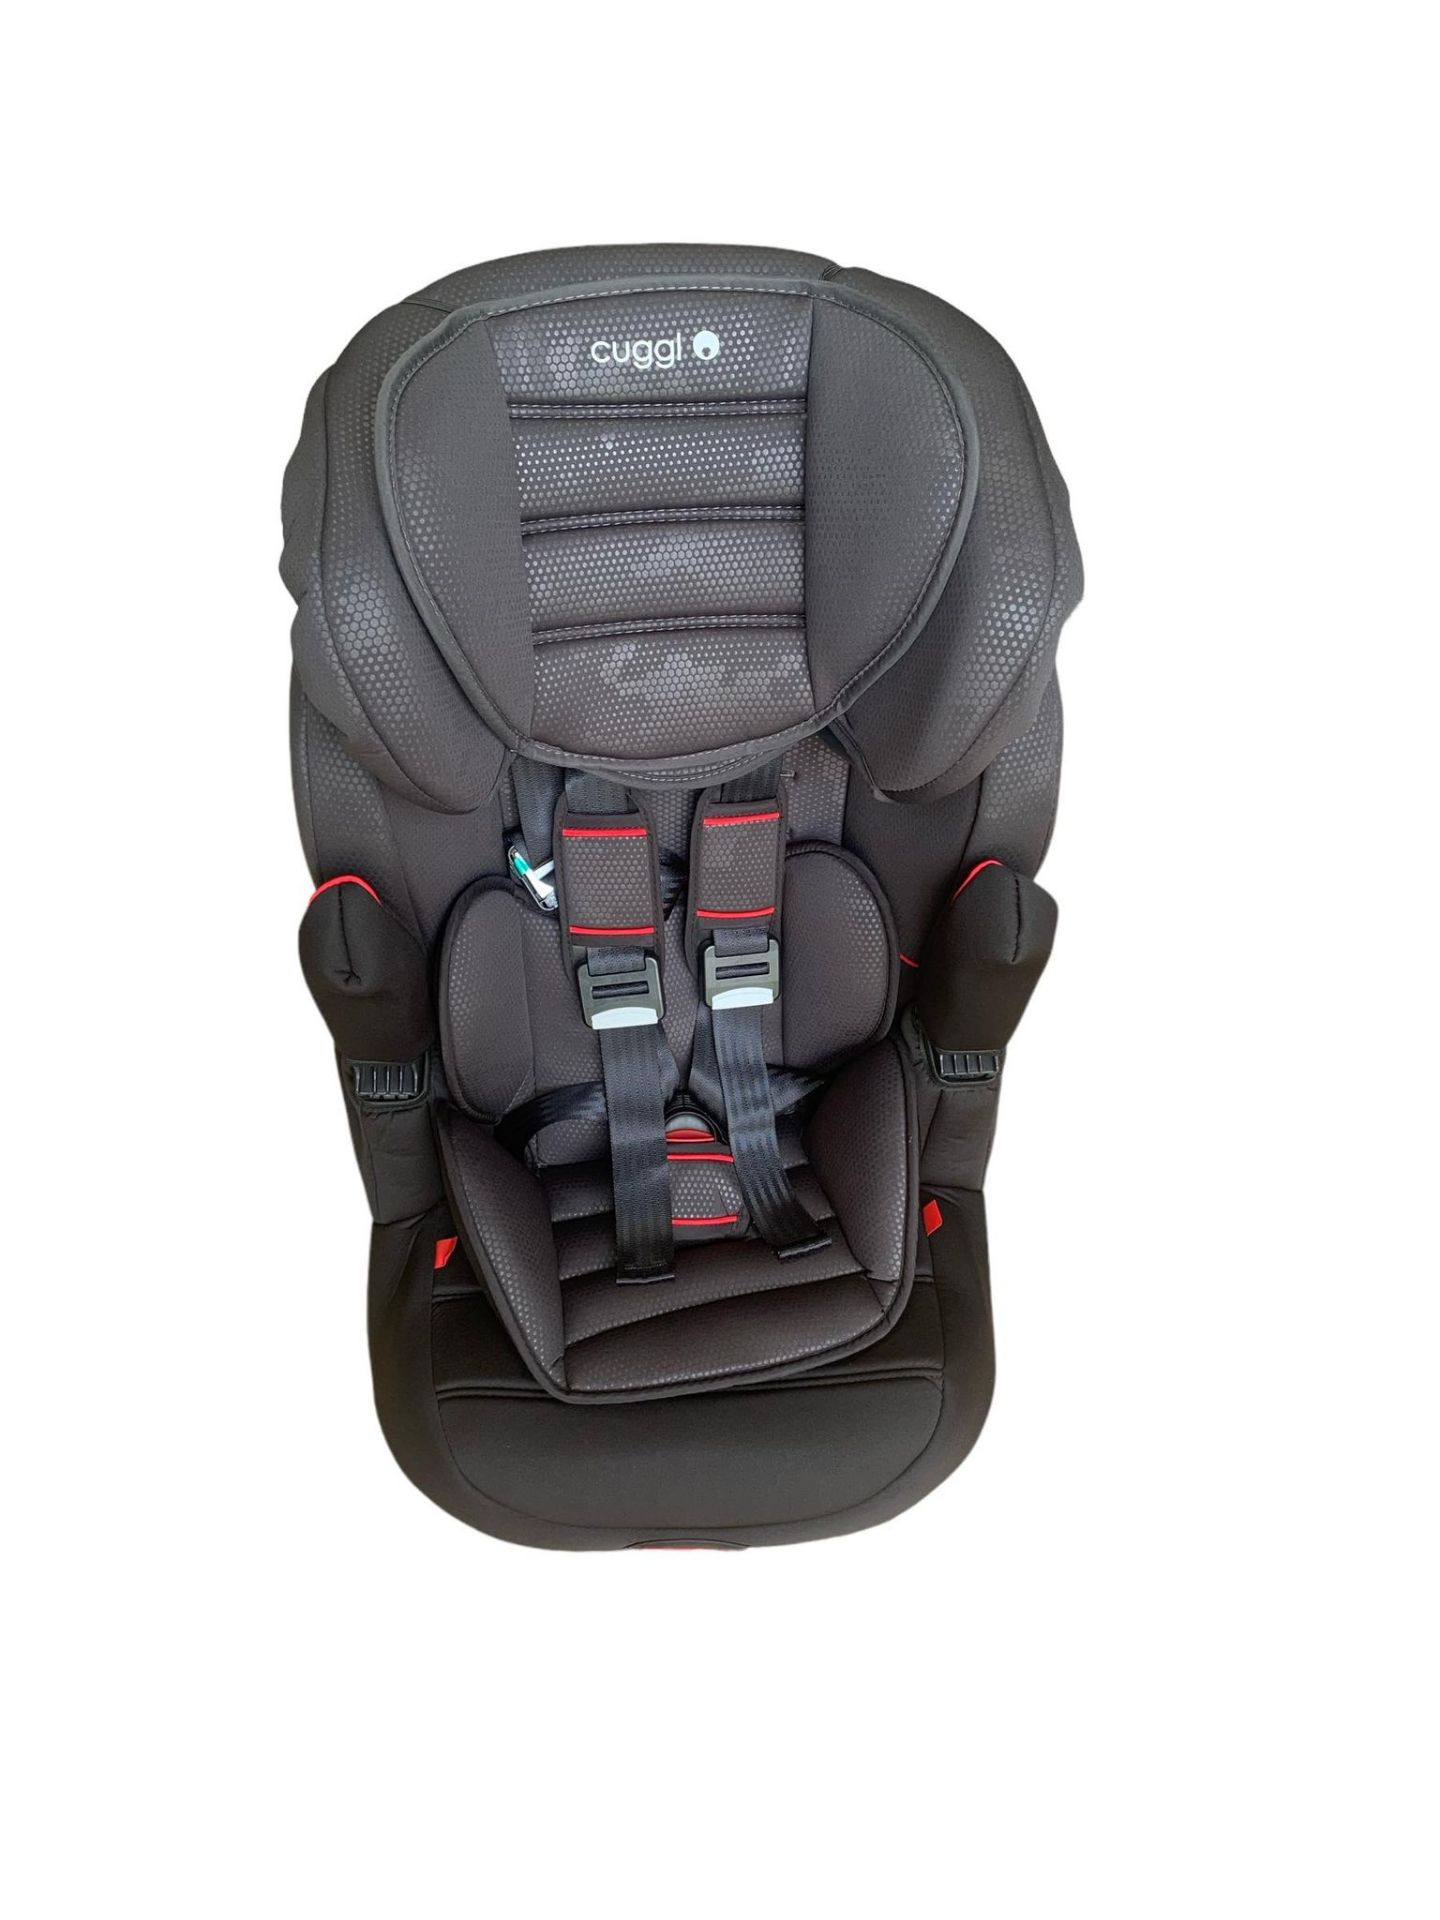 BRAND NEW CUGGL LINNET GROUP 1/2/3 ISOFIX CAR SEAT - Image 3 of 6